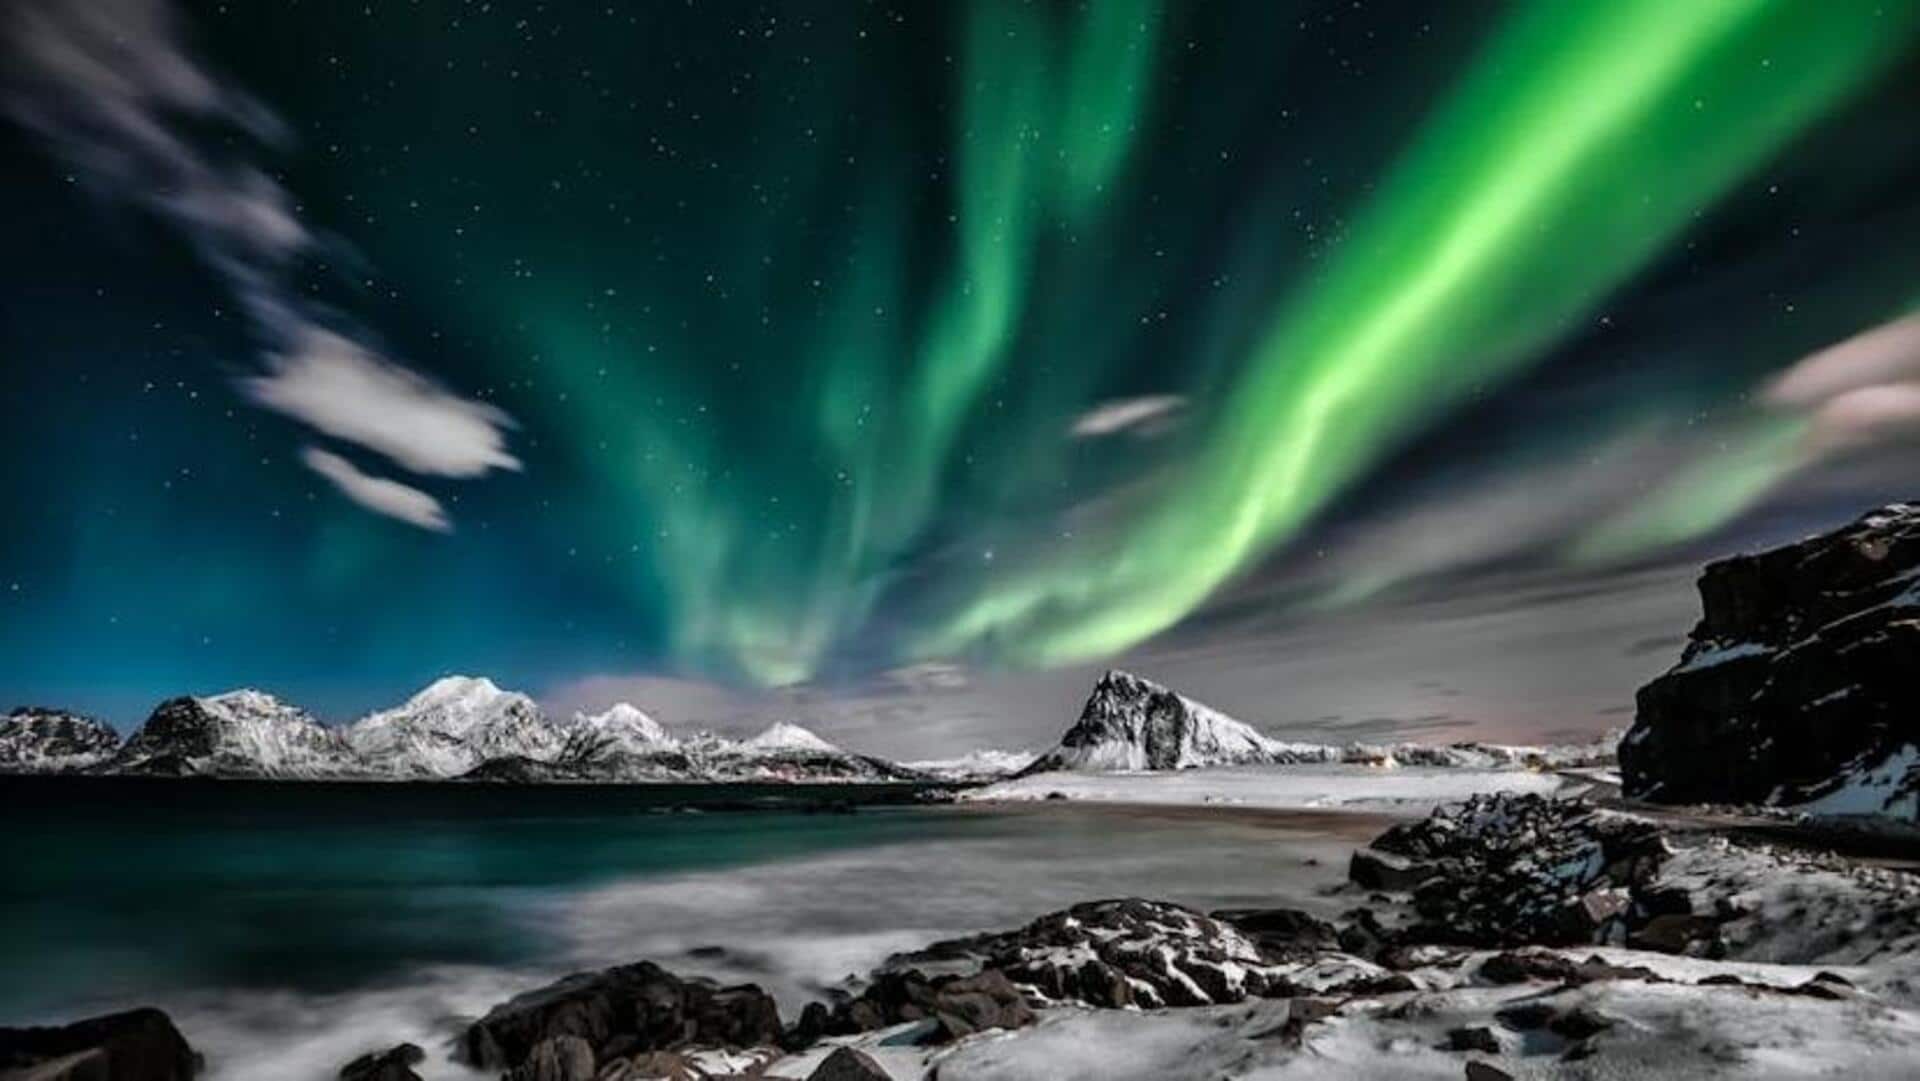 Visit Tromso, Norway for a gateway to the northern lights